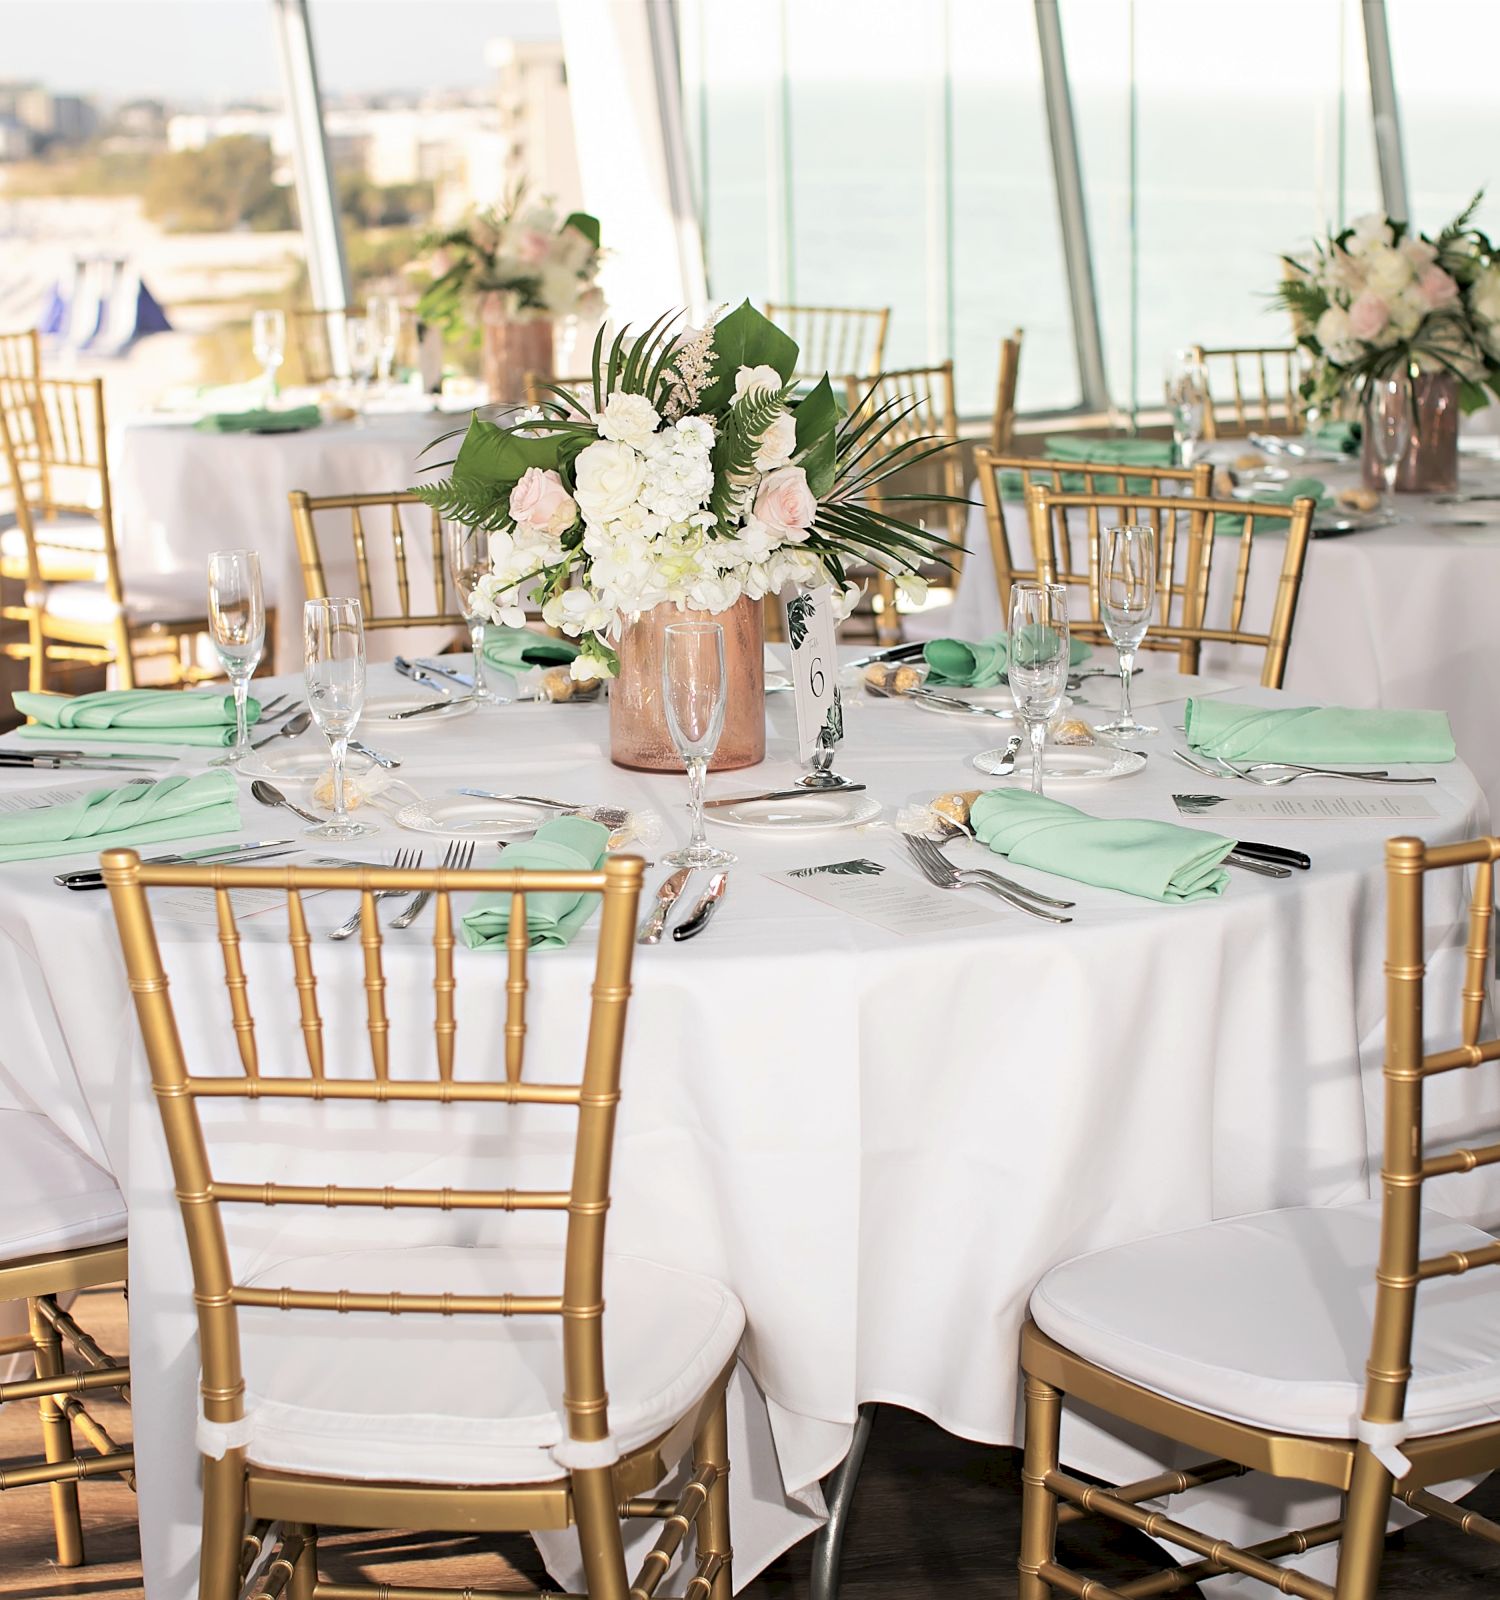 Elegant table setting with golden chairs, floral centerpieces, and ocean view.